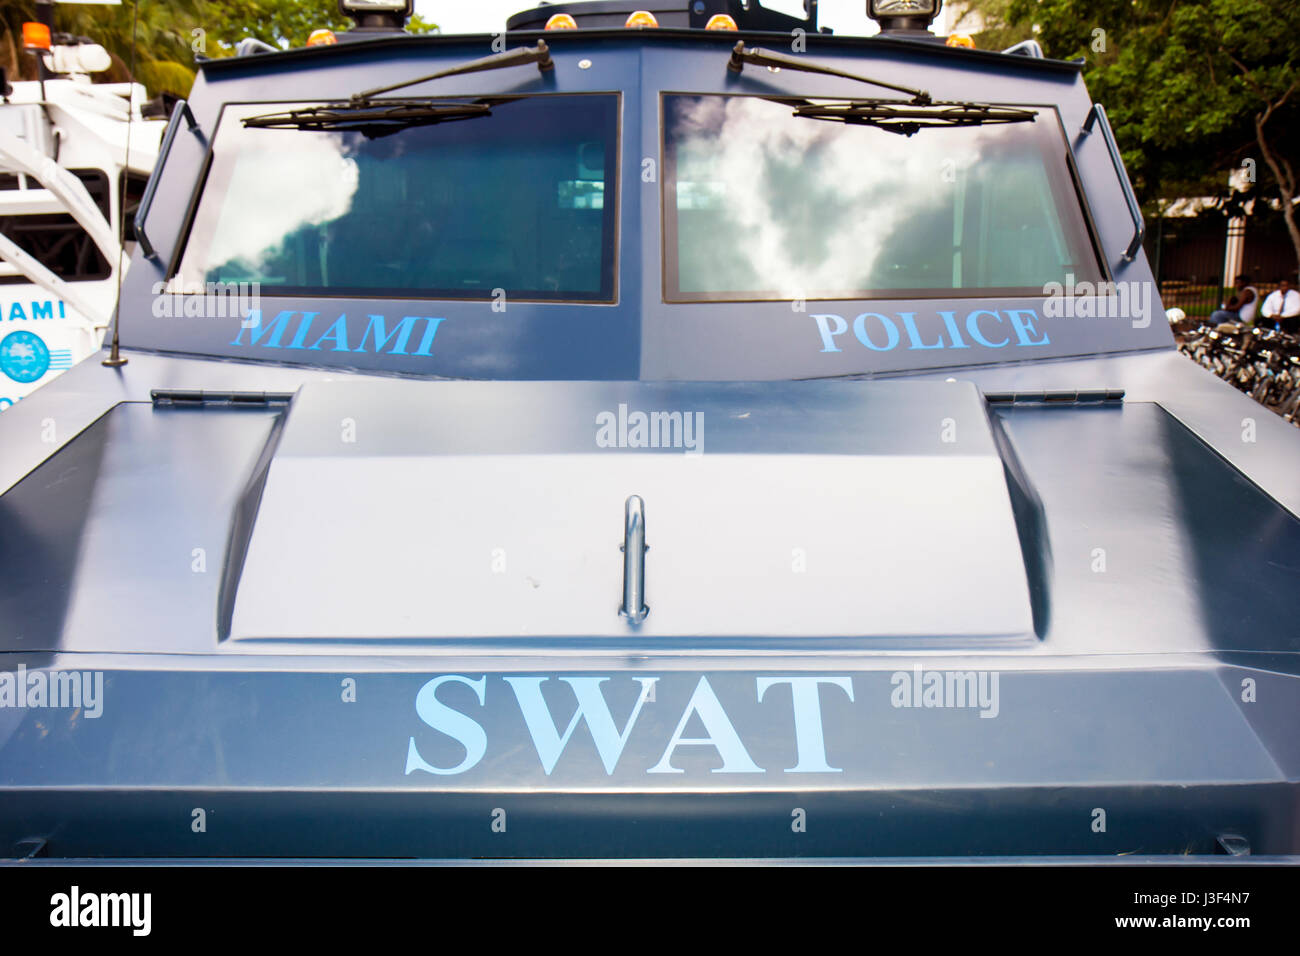 Miami Florida,Miami Police Department,Police Recruitment Open house,houses,specialized equipment display sale SWAT,vehicle,Protect,public safety,armor Foto Stock